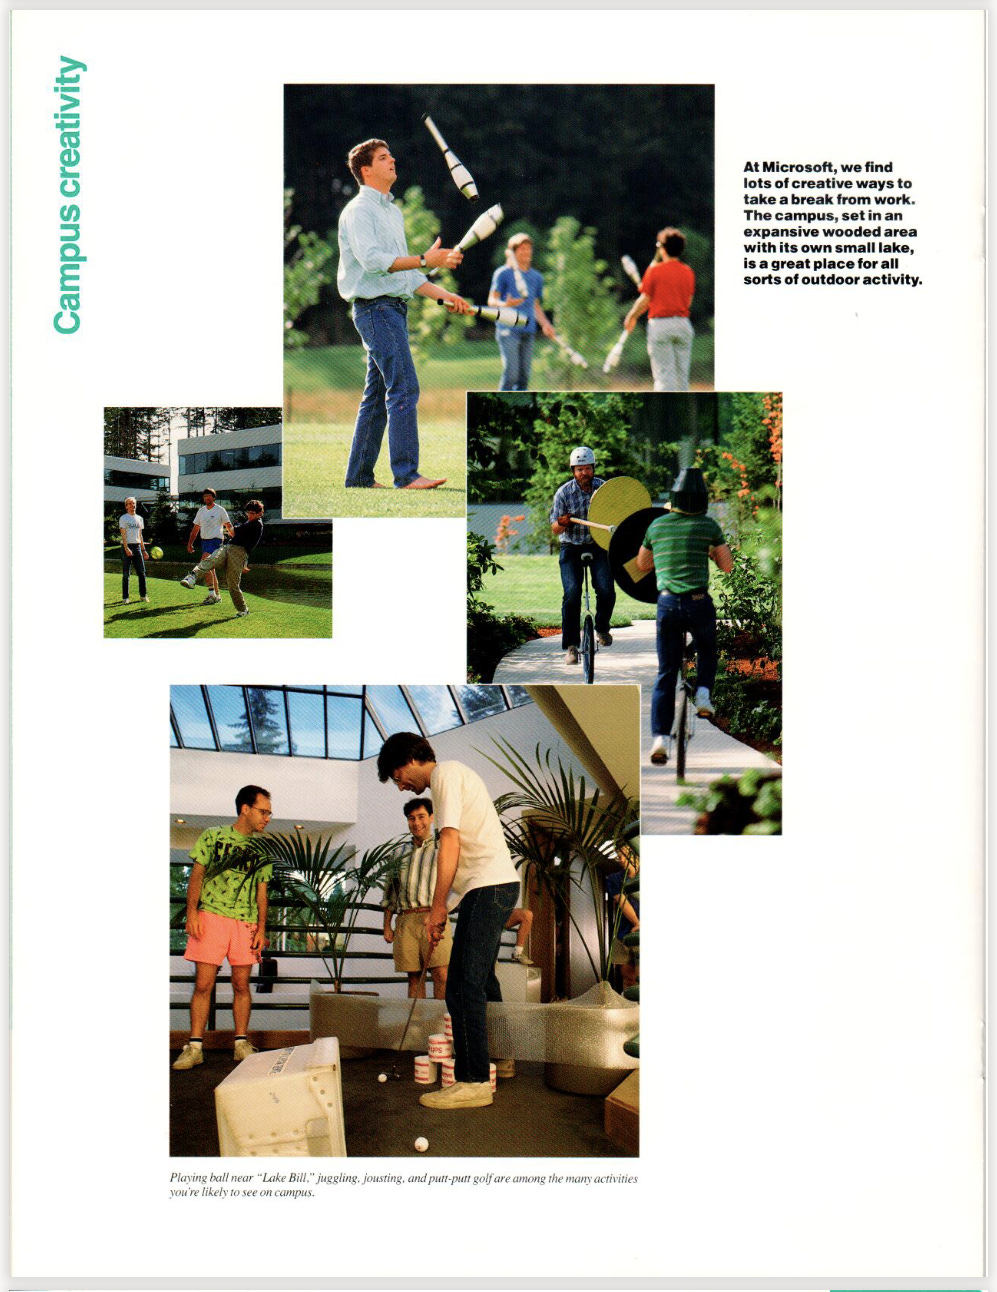 Page from a brochure featuring four photos. One is of people juggling in sunshine. One is people playing soccer, but wearing work clothes. Another are two people medieval jousting on unicycles. The final photo are several people putting golf balls in a hallway.